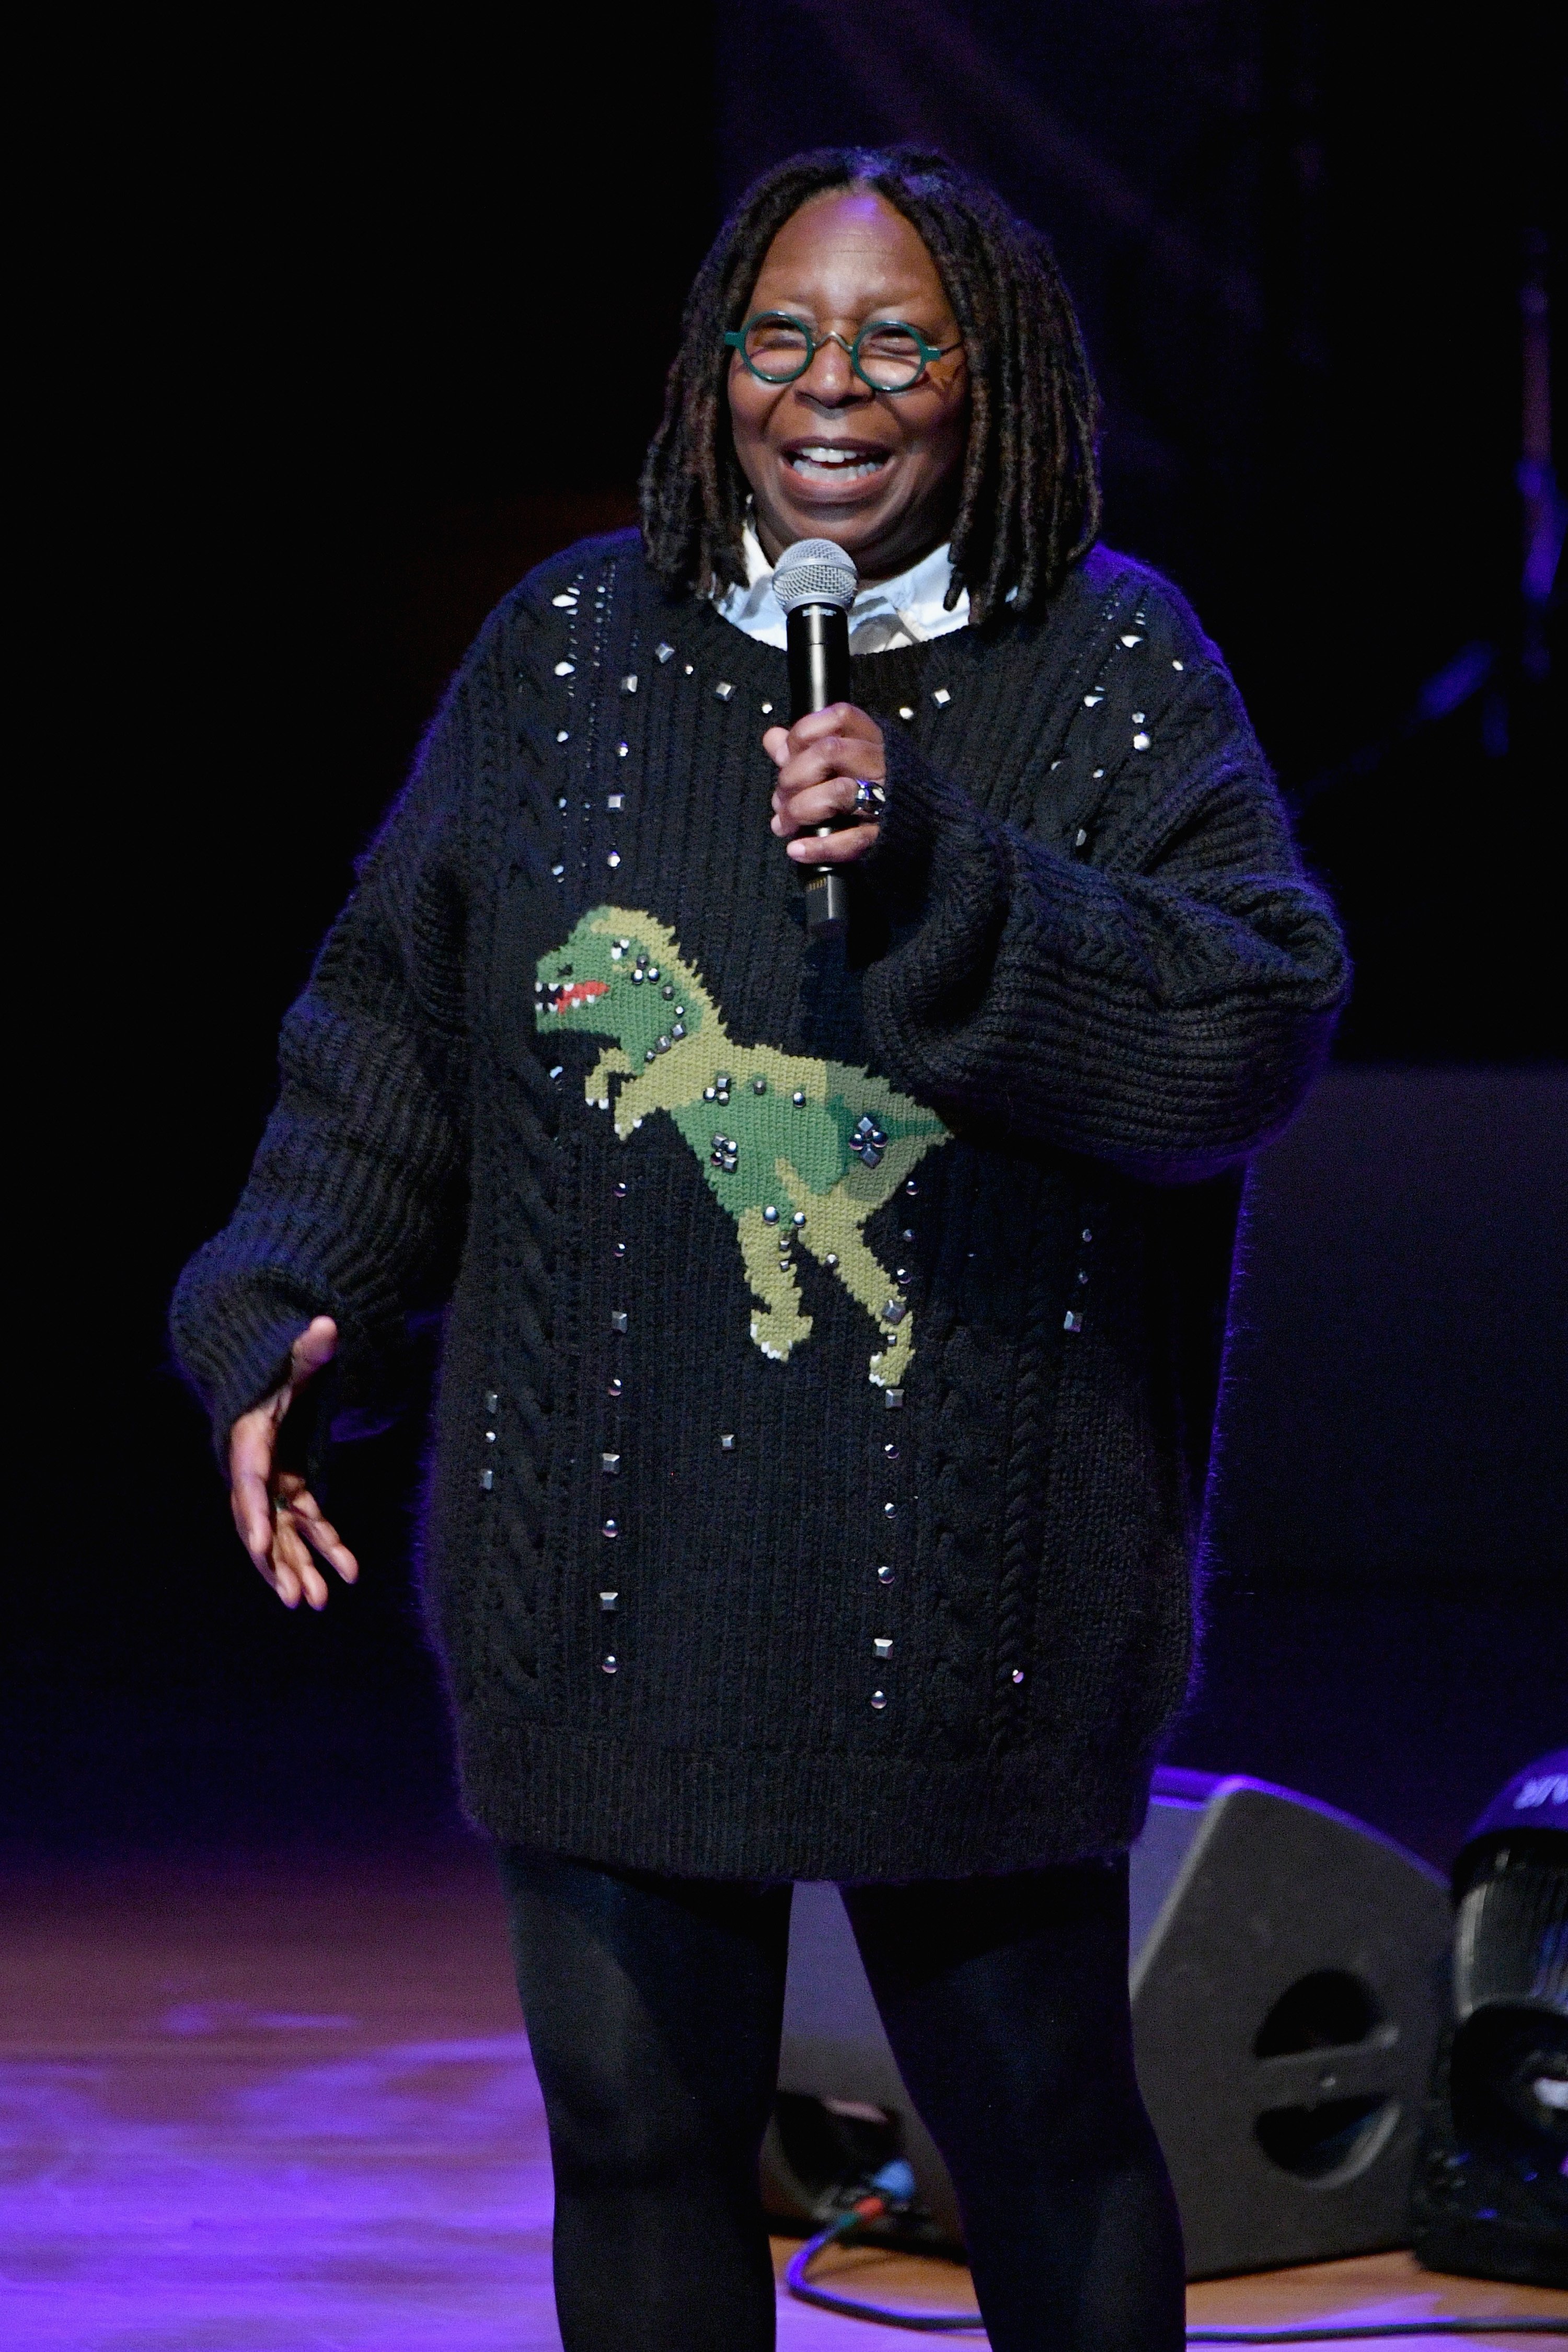 Whoopi Goldberg at the Lincoln Center Fashion Gala on Nov. 29, 2018 in New York City | Photo: Getty Images